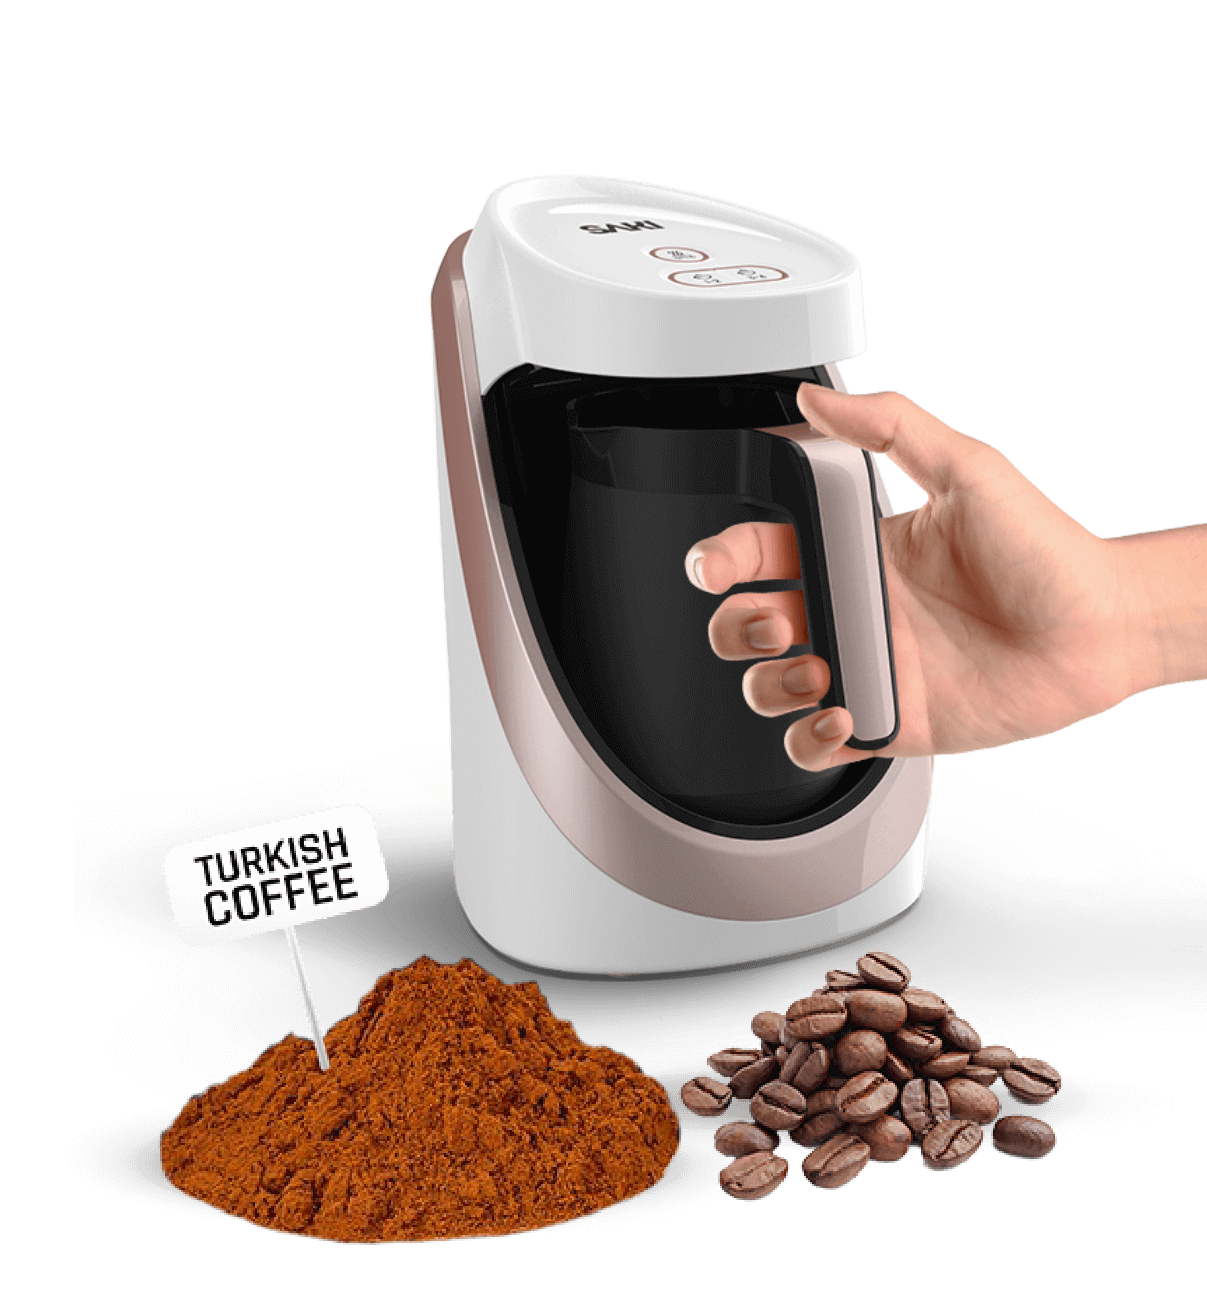 Make sure your coffee is ground extremely fine, to a cezve grind. This will ensure a balanced flavor, but also a good foam.